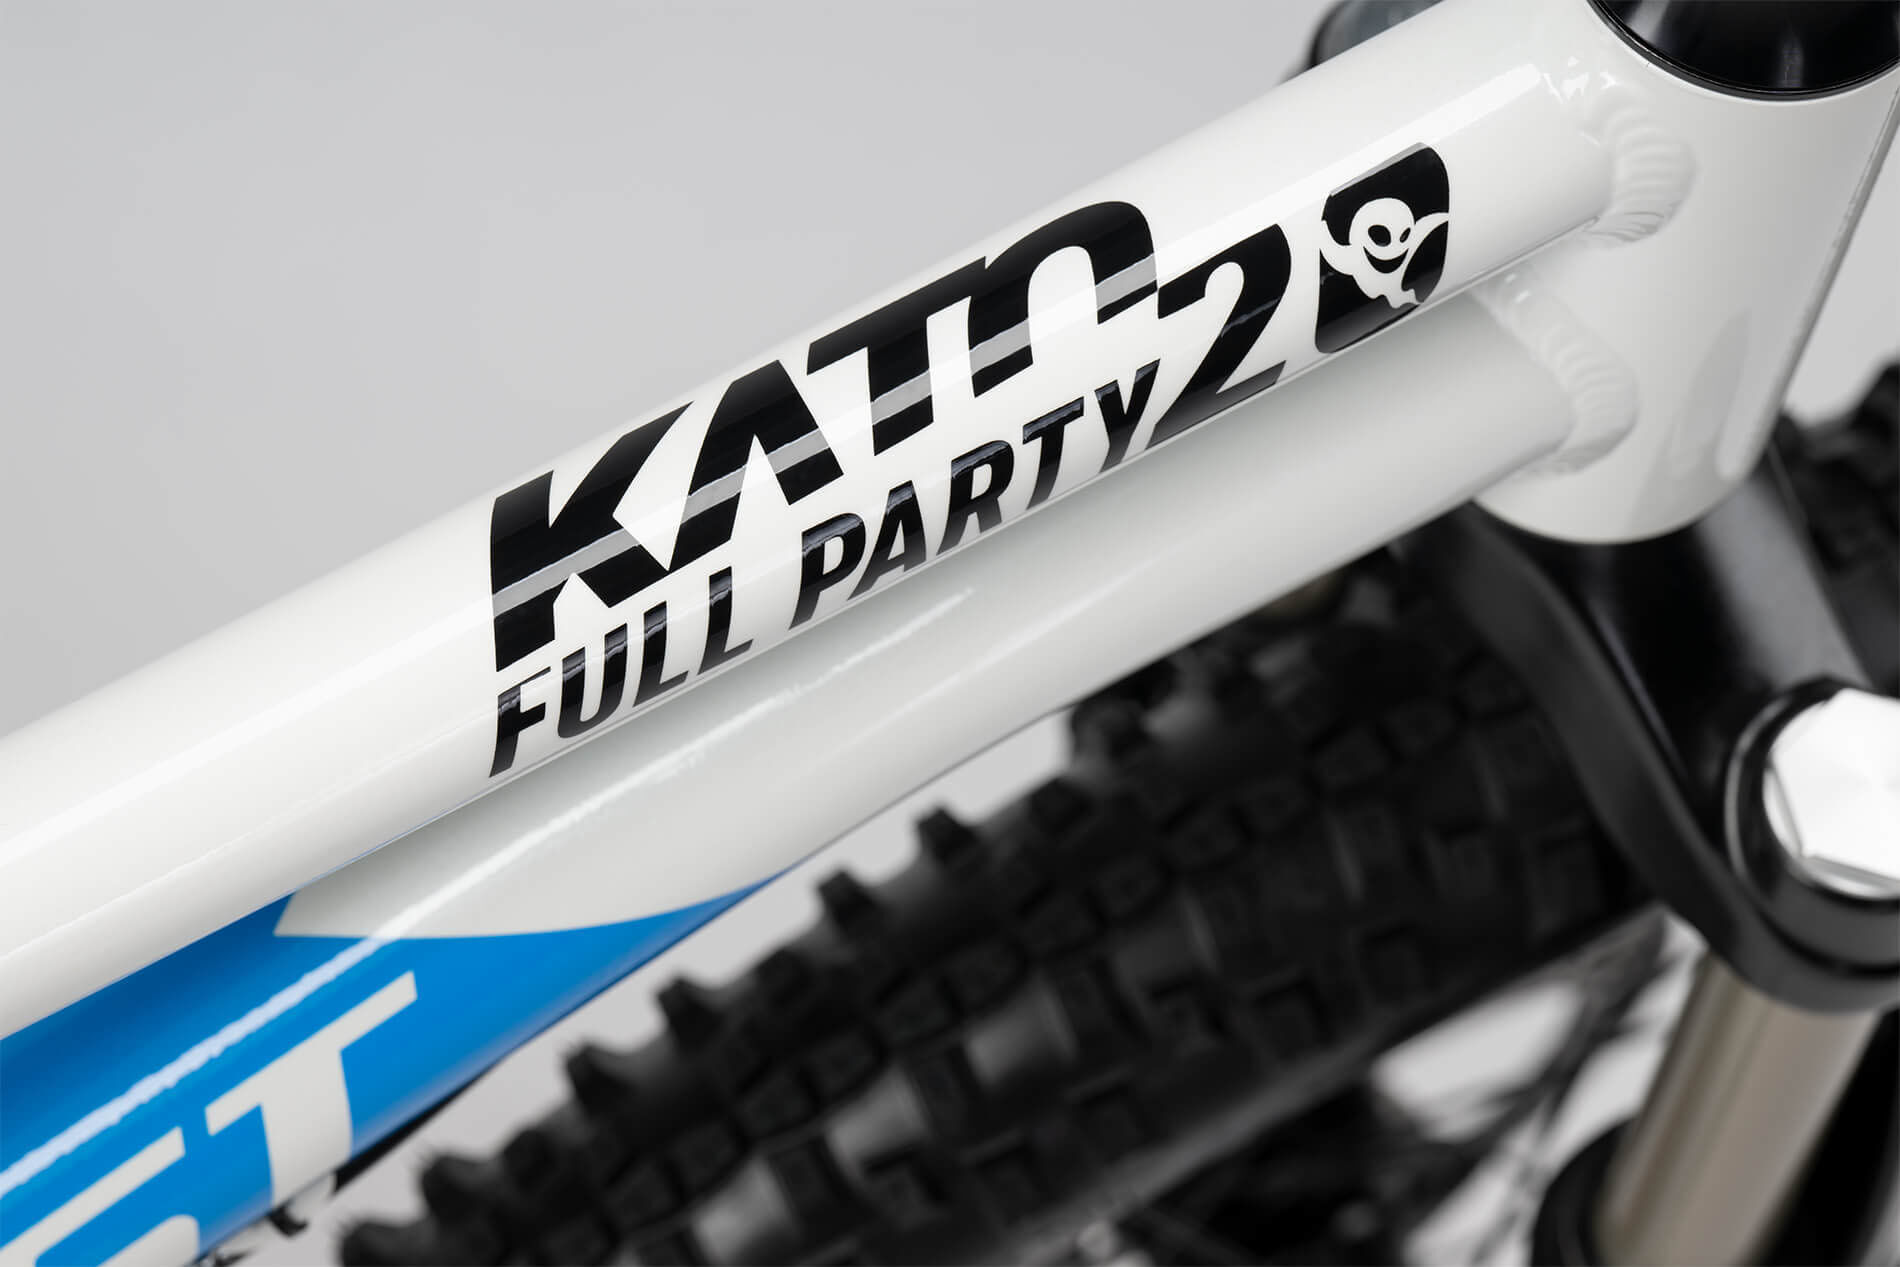 Ghost Kato 20 Full Party,MTB, pearl white/bright blue - glossy